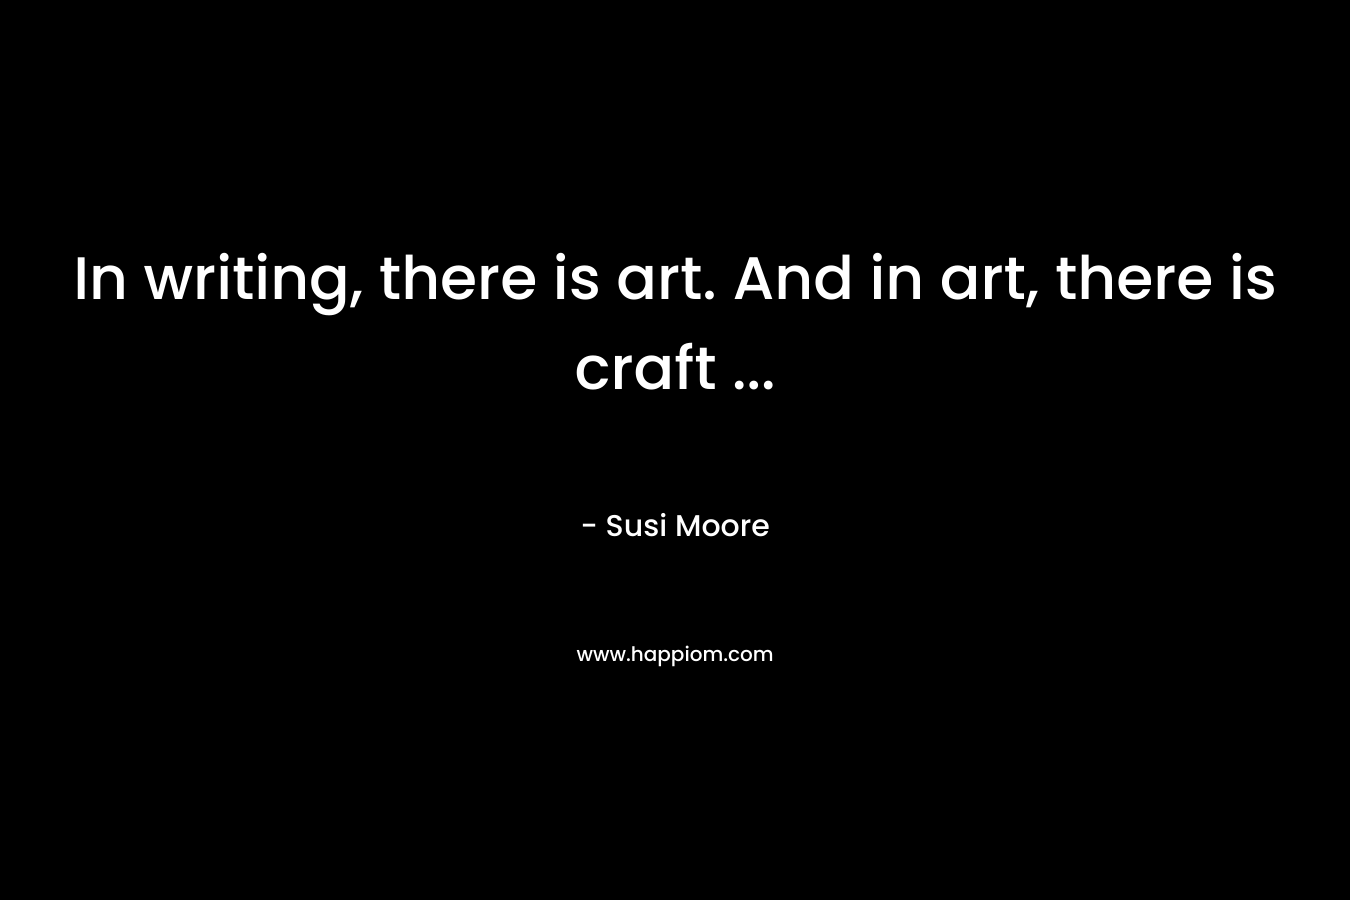 In writing, there is art. And in art, there is craft ...